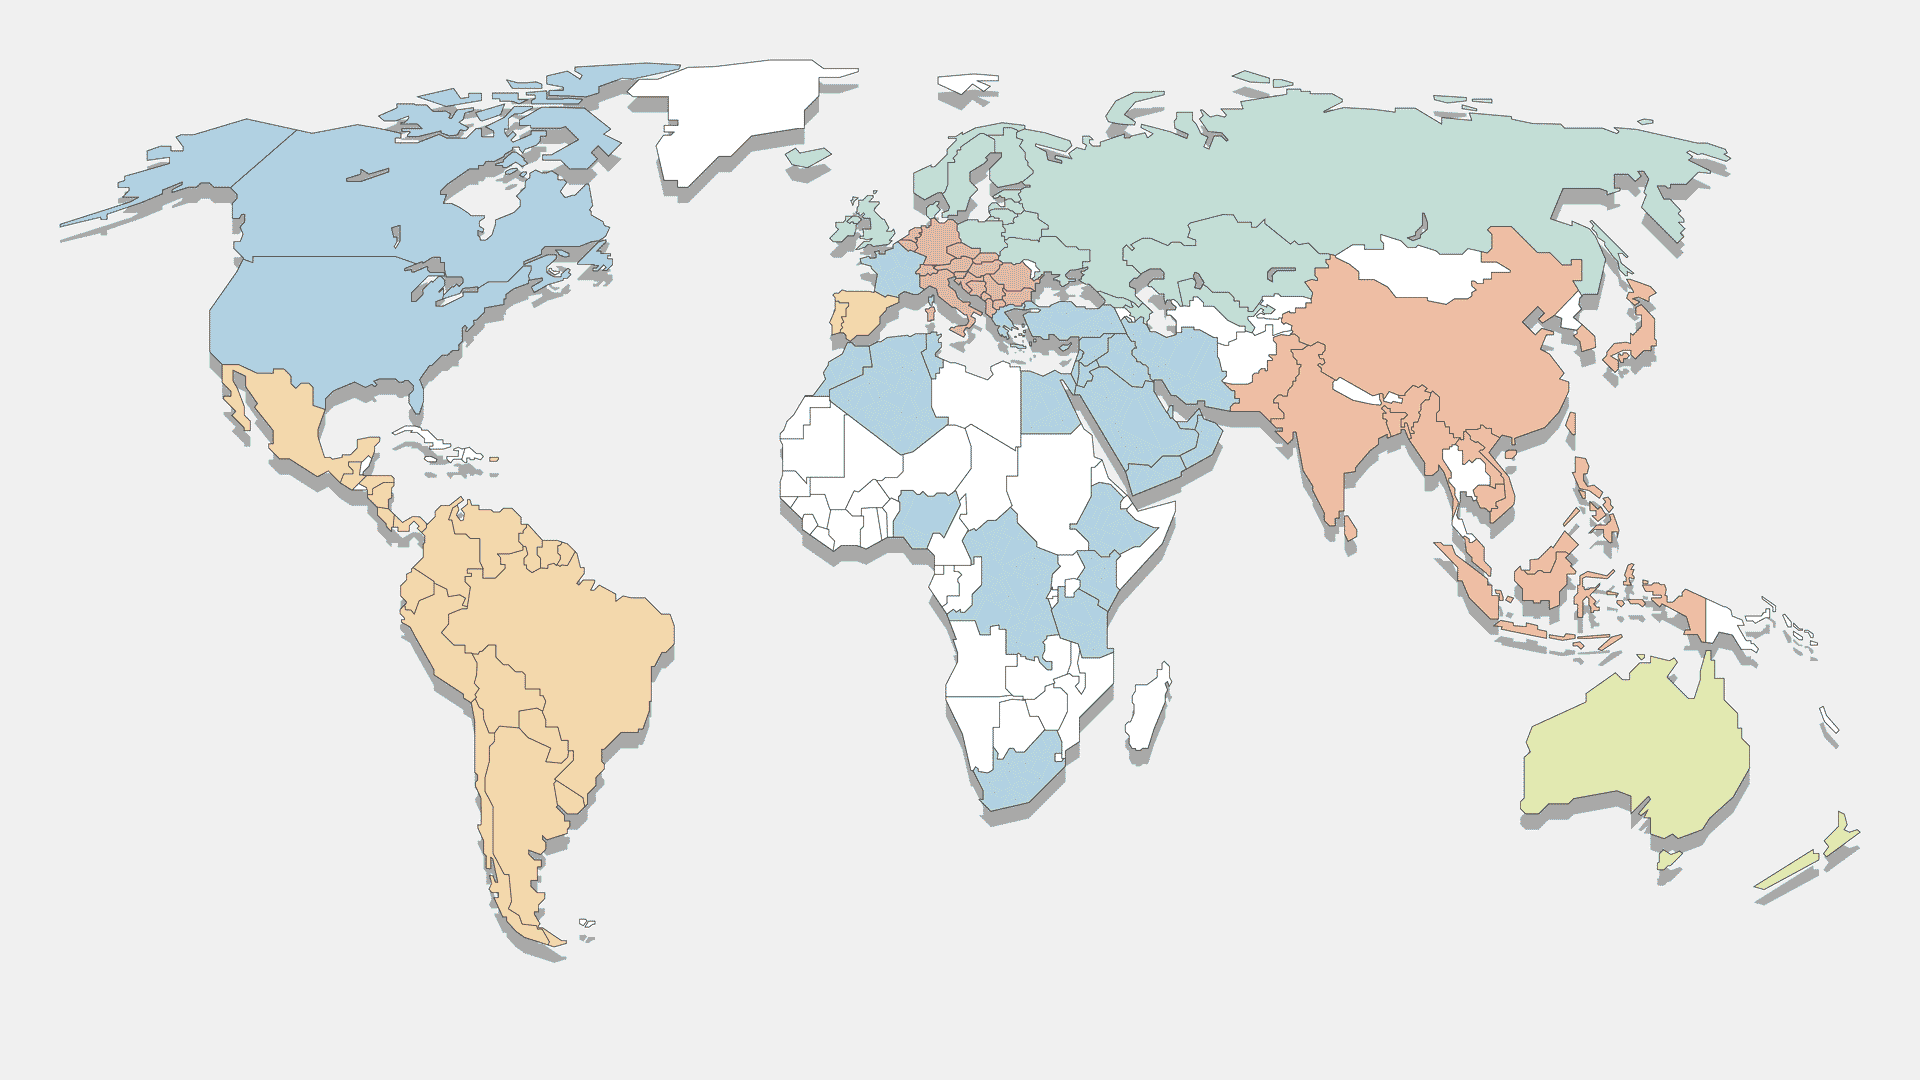 World map with colored regions